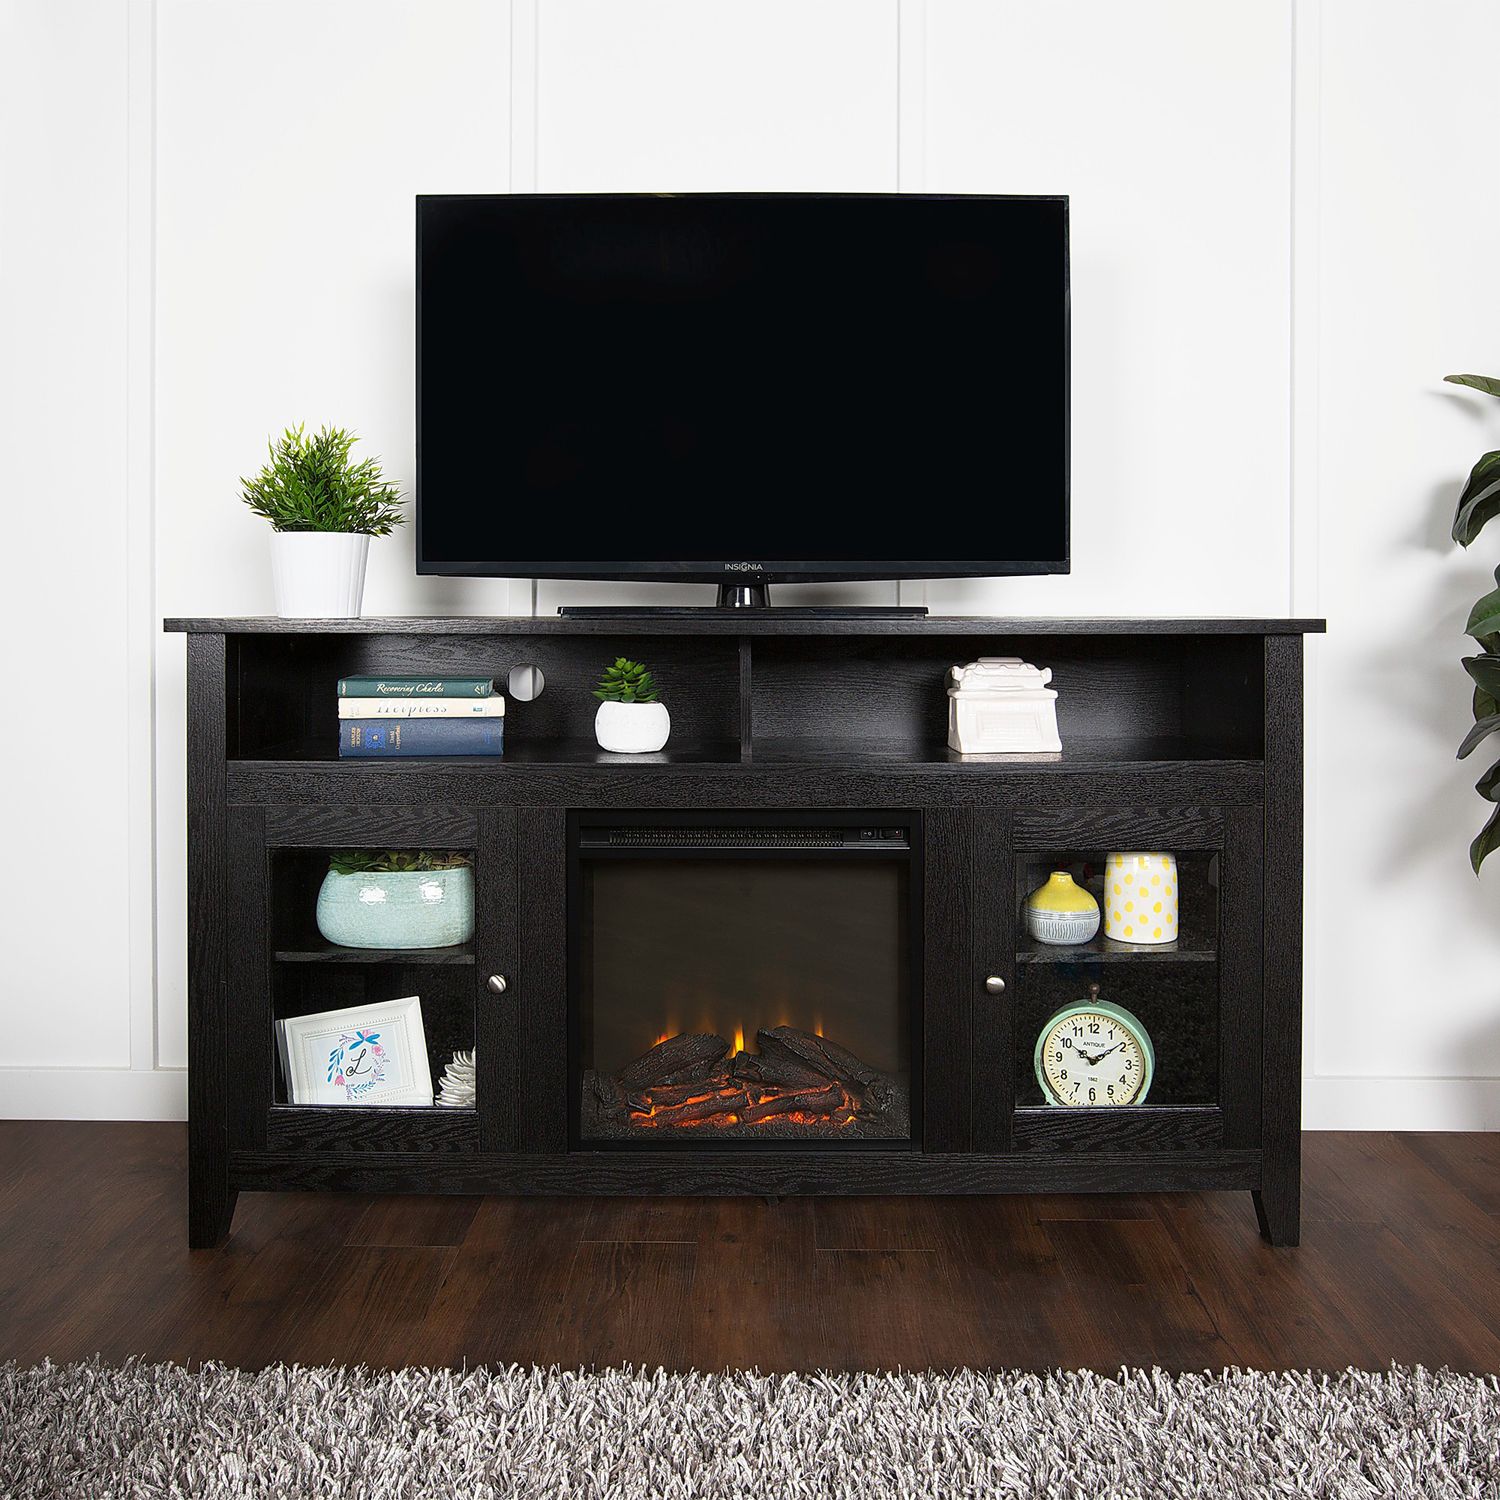 Highboy Wood Fireplace Tv Stand – Pier1 In Wood Highboy Fireplace Tv Stands (View 13 of 20)